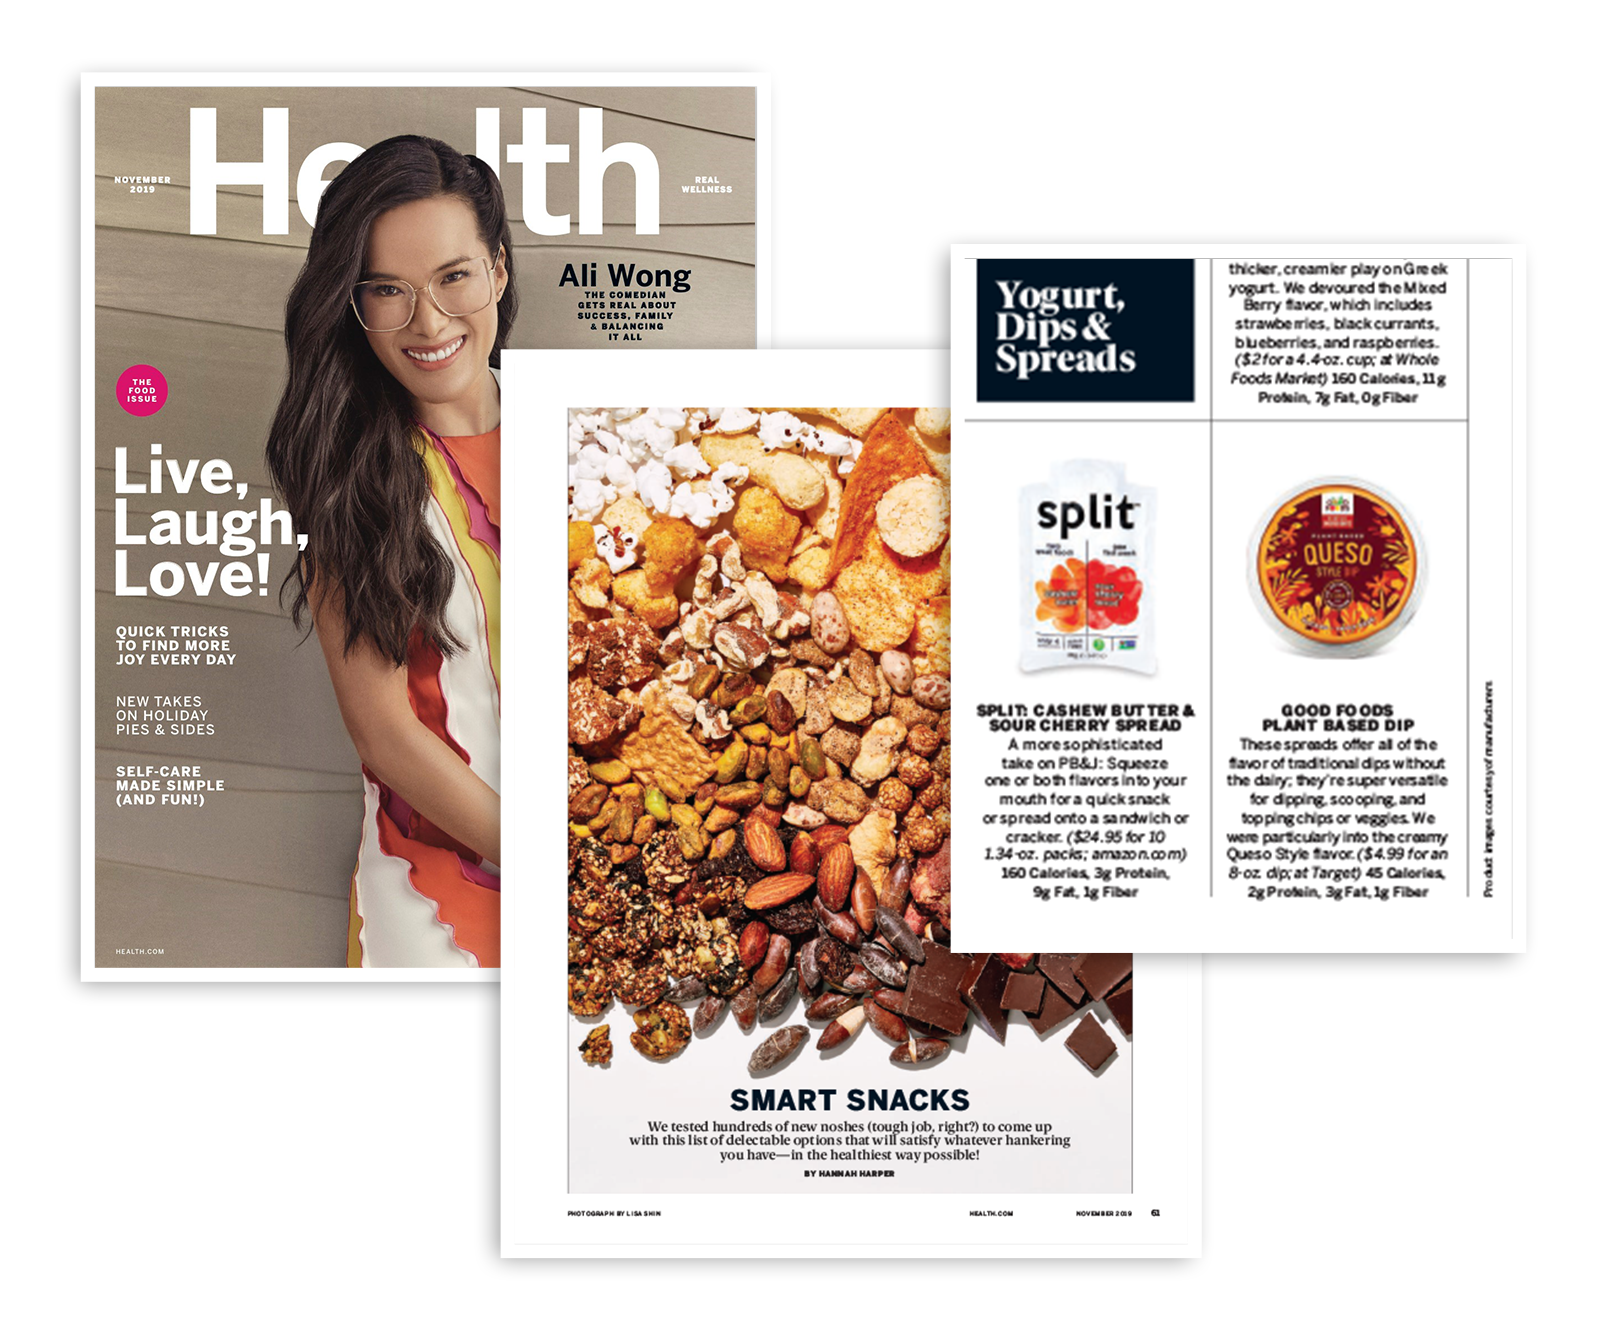 An example of Good Foods media placement in Health magazine